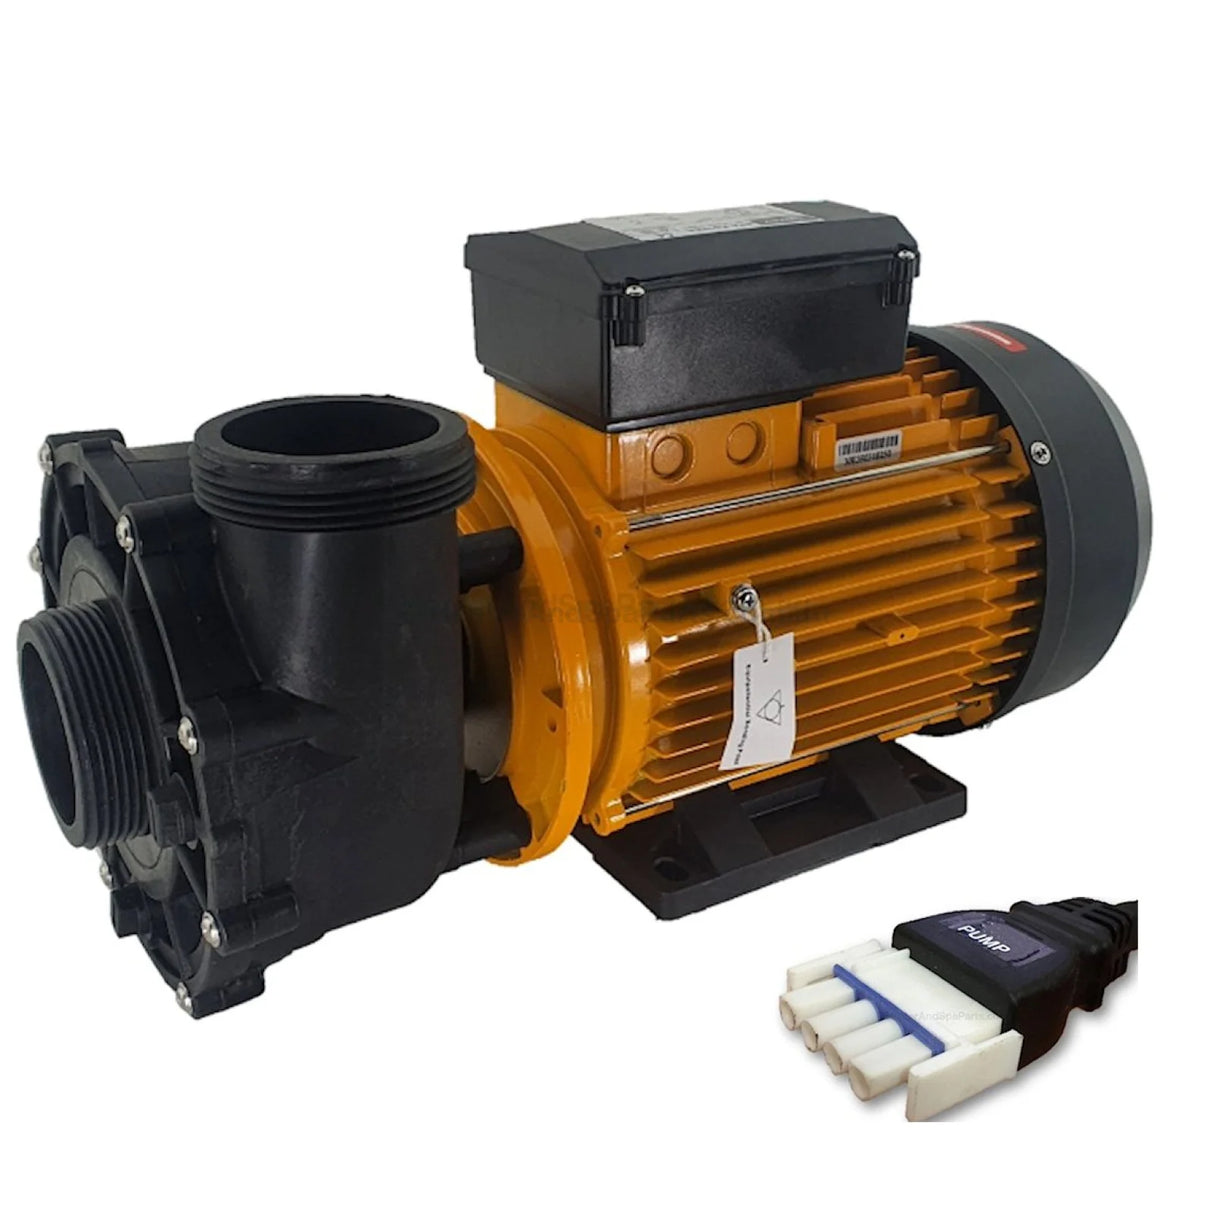 2.5Hp 1-Speed - Davey Spaquip Qb2501 1850W Spa Jet Booster Pump 50Mm Overmoulded Amp Pumps